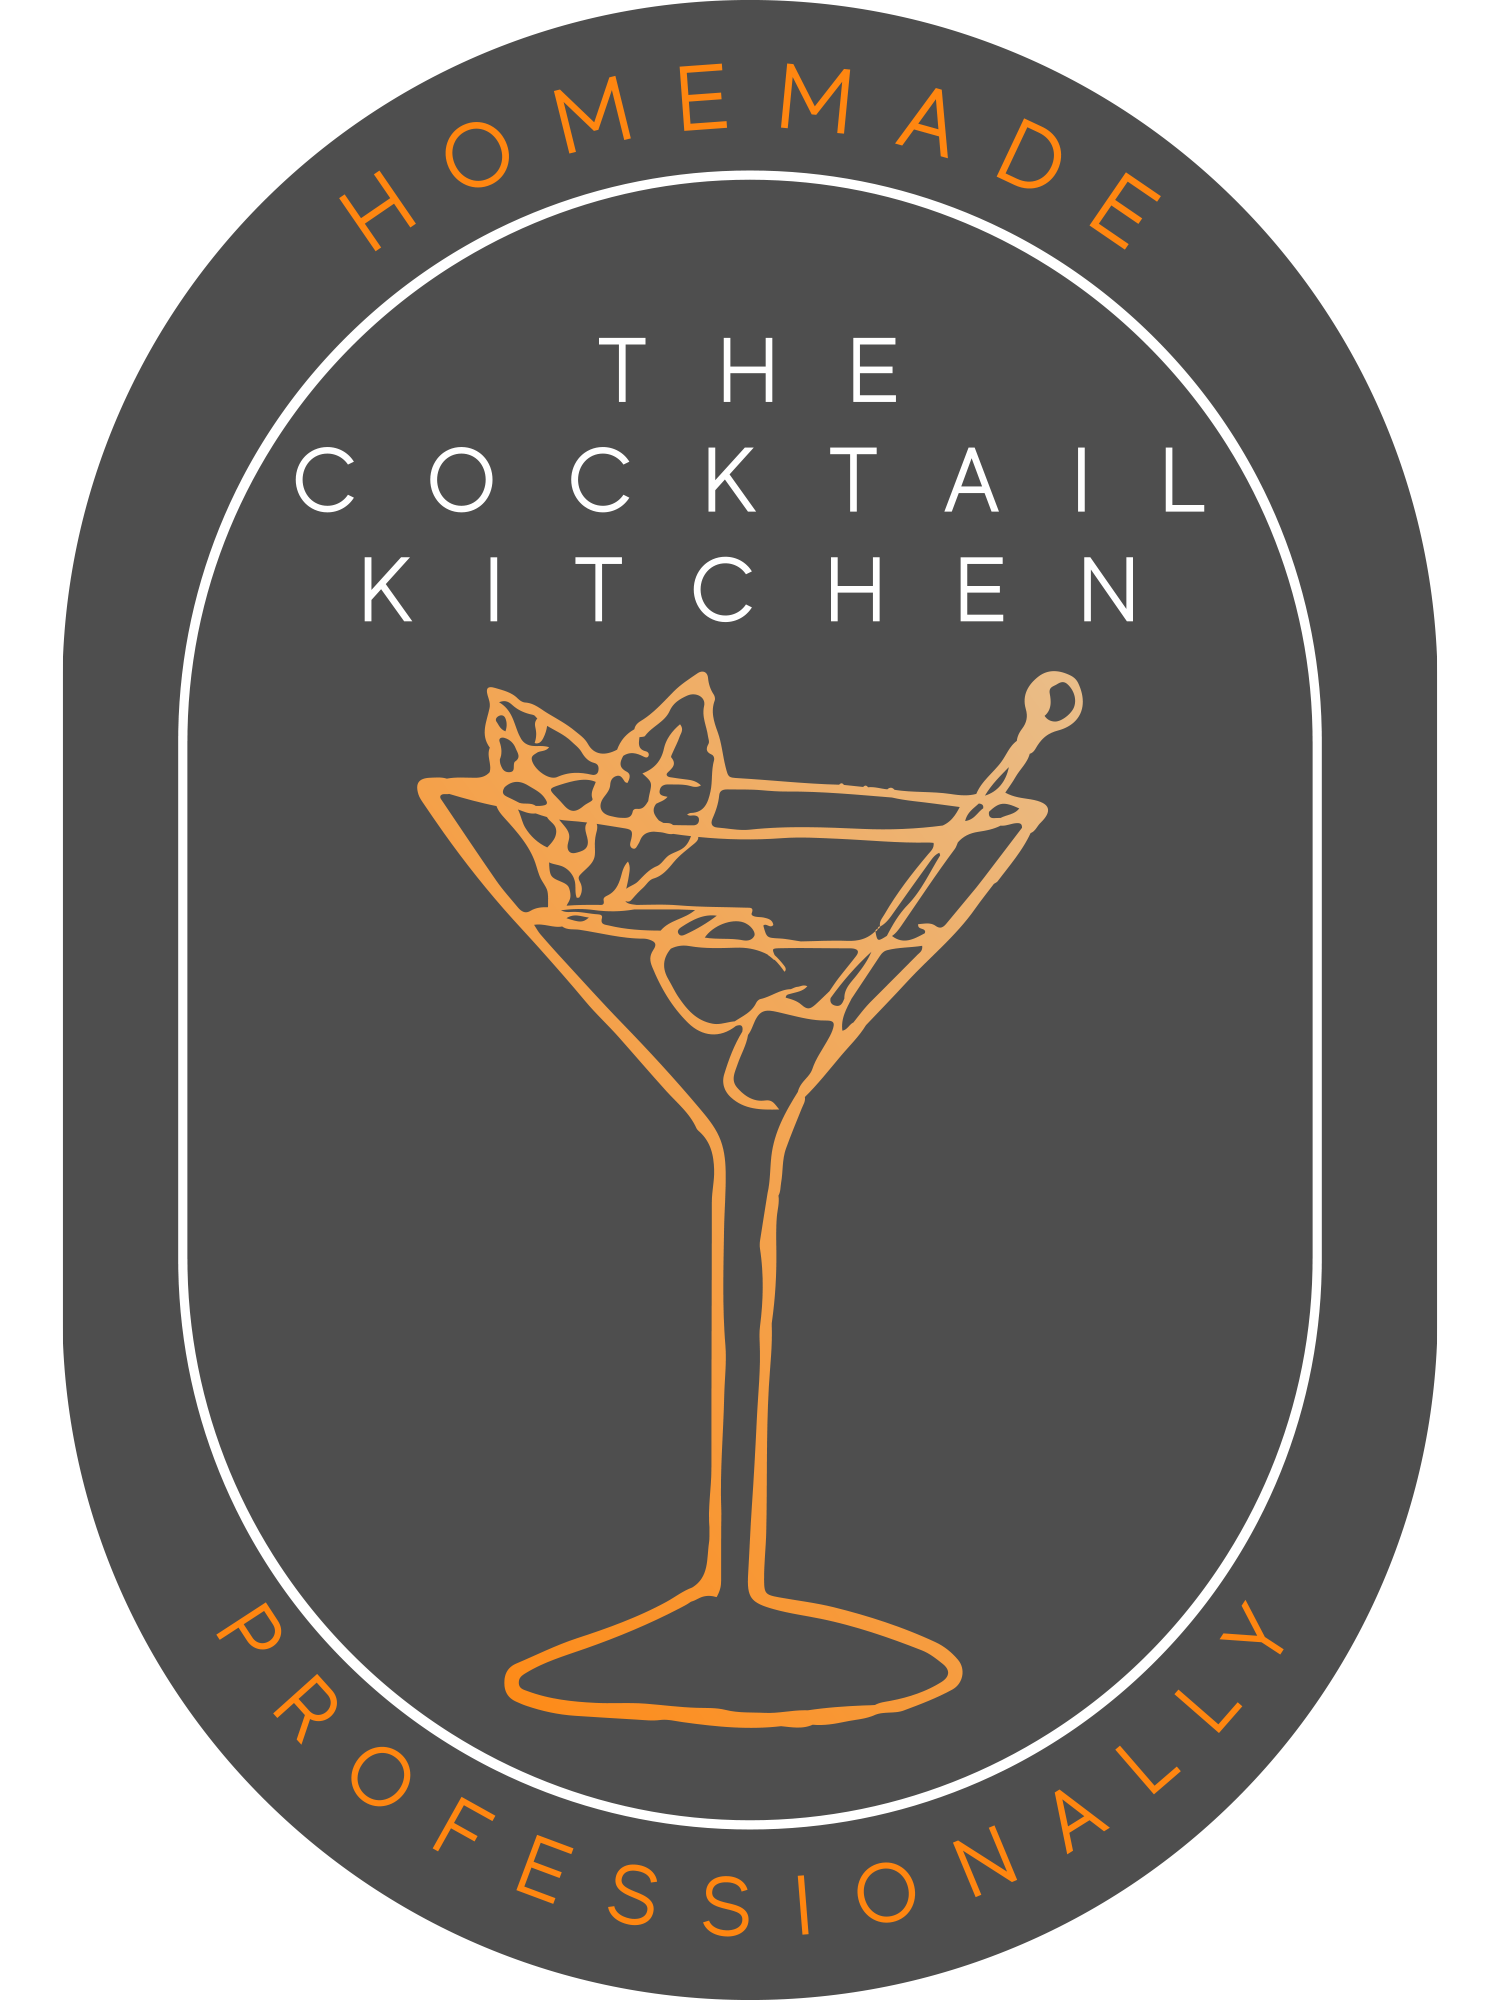 The Cocktail Kitchen